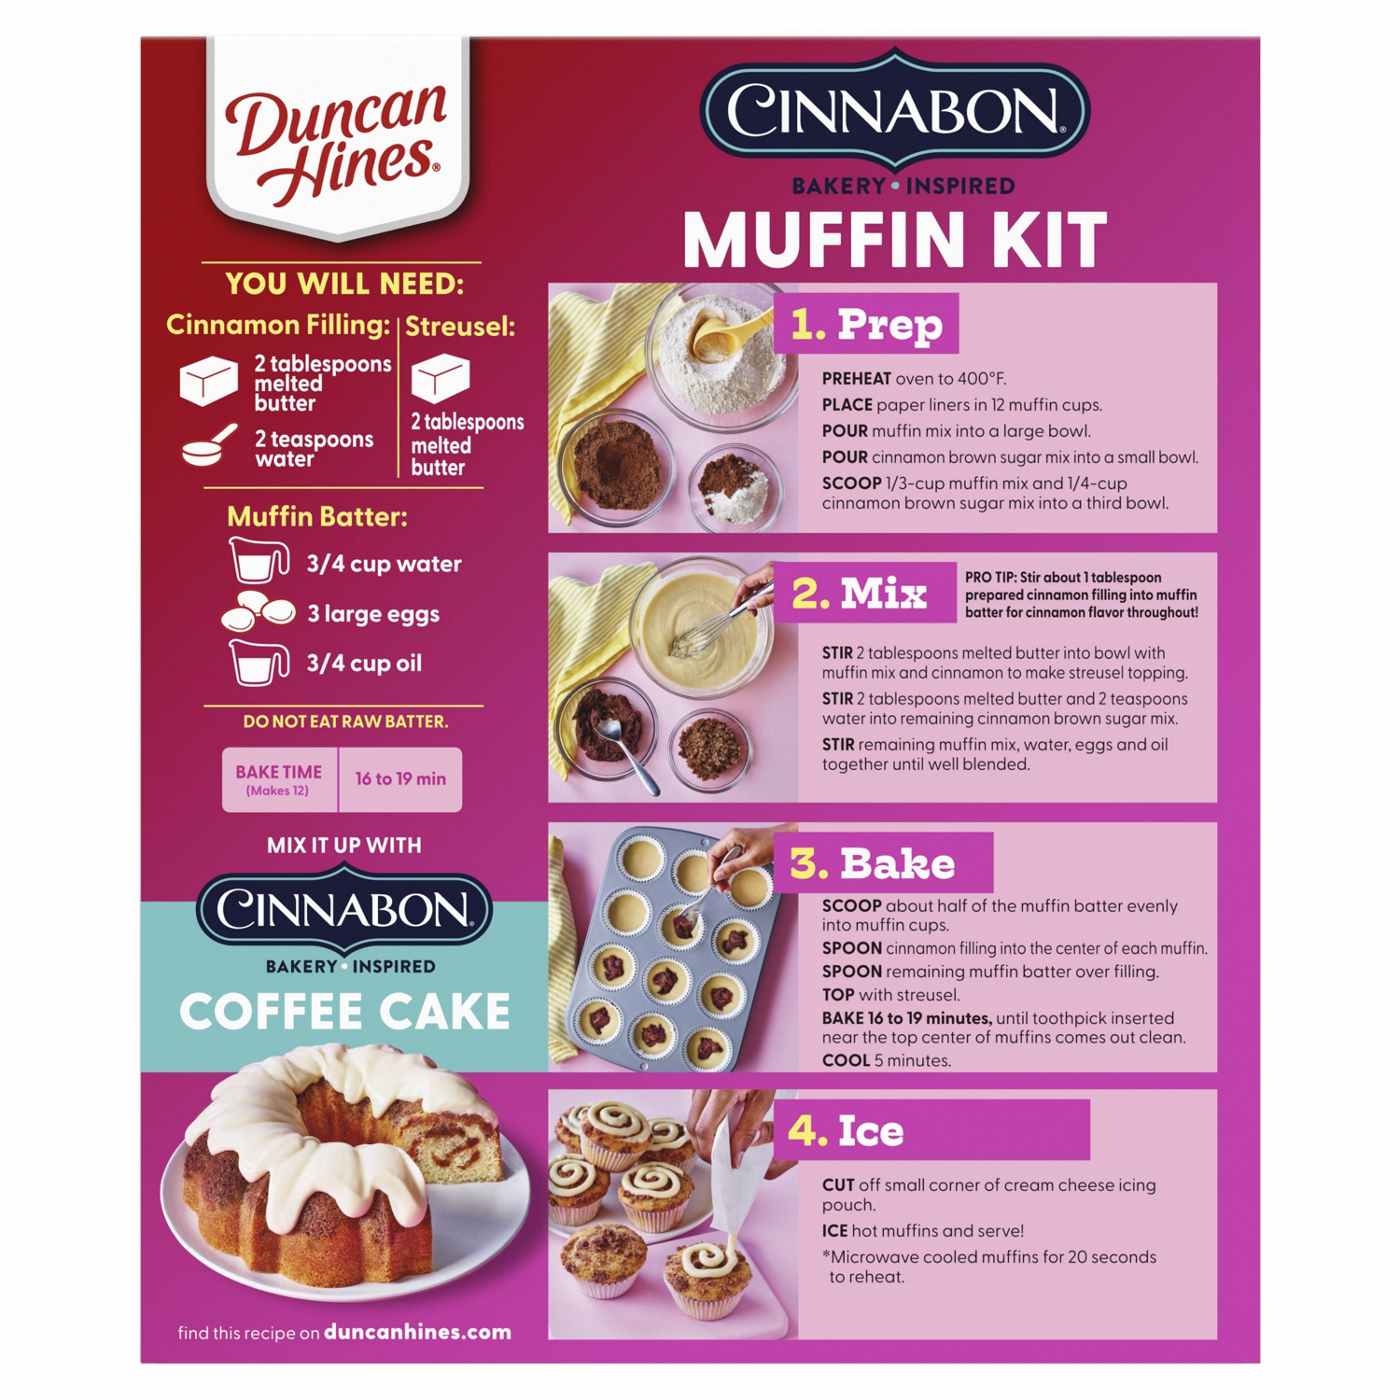 Duncan Hines Epic Cinnabon Bakery Inspired Muffin Kit; image 3 of 5